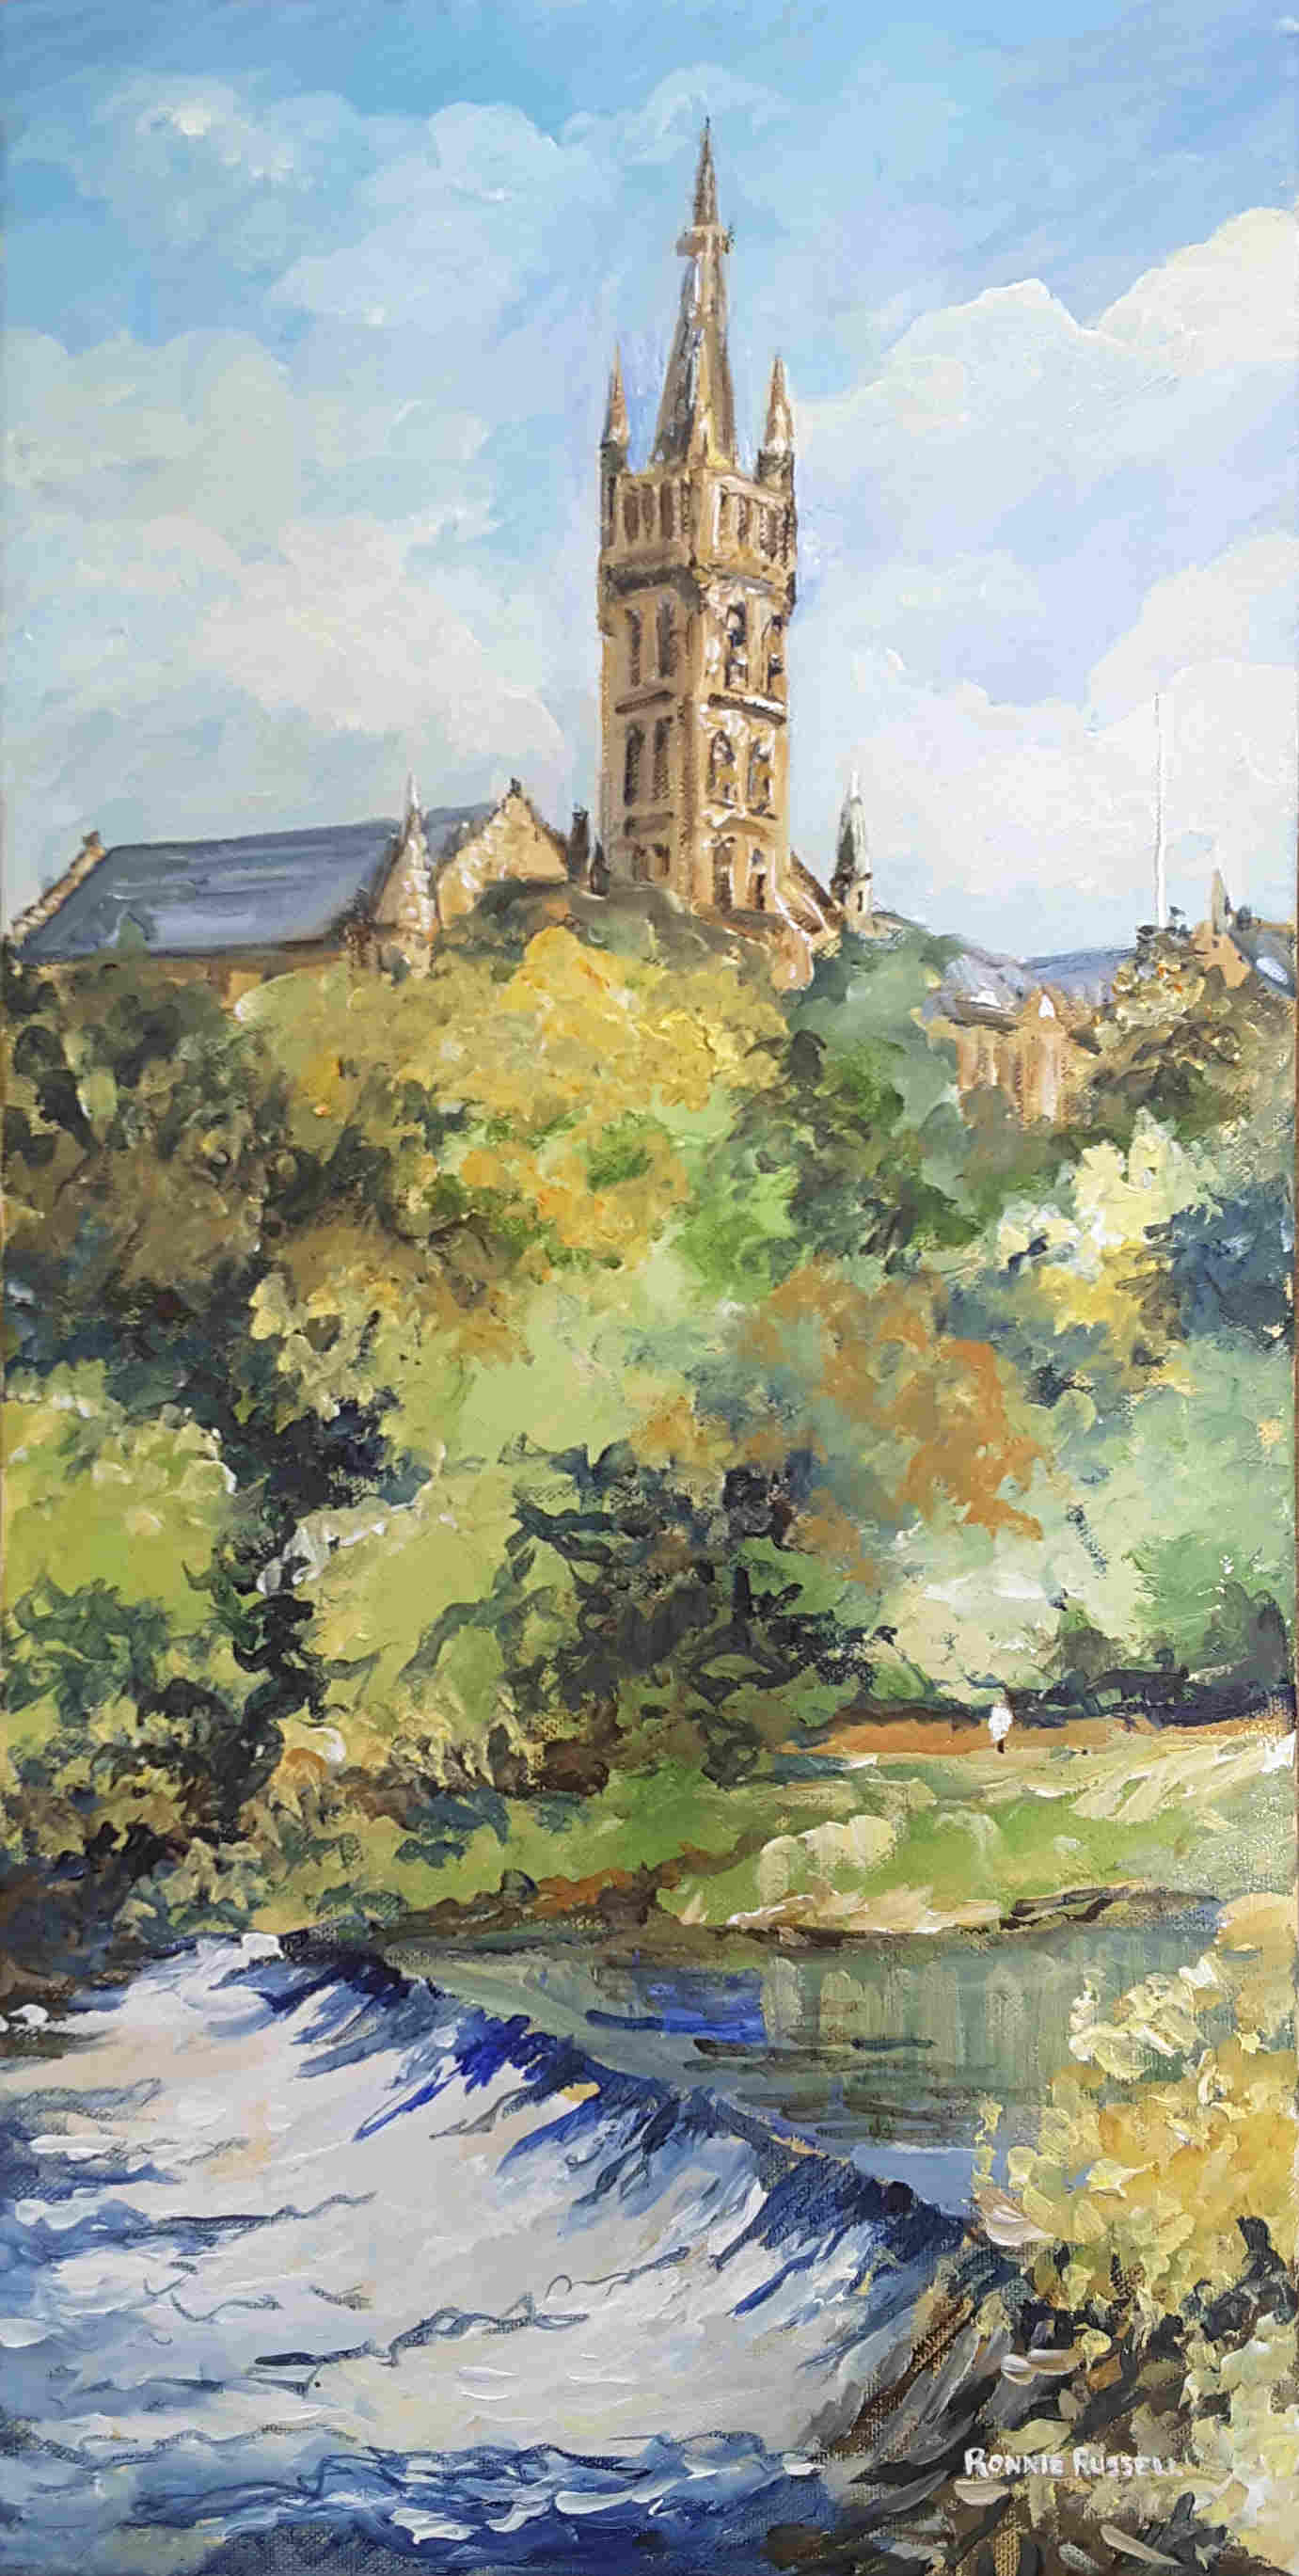 'Glasgow University and River Kelvin' by artist Ronnie Russell